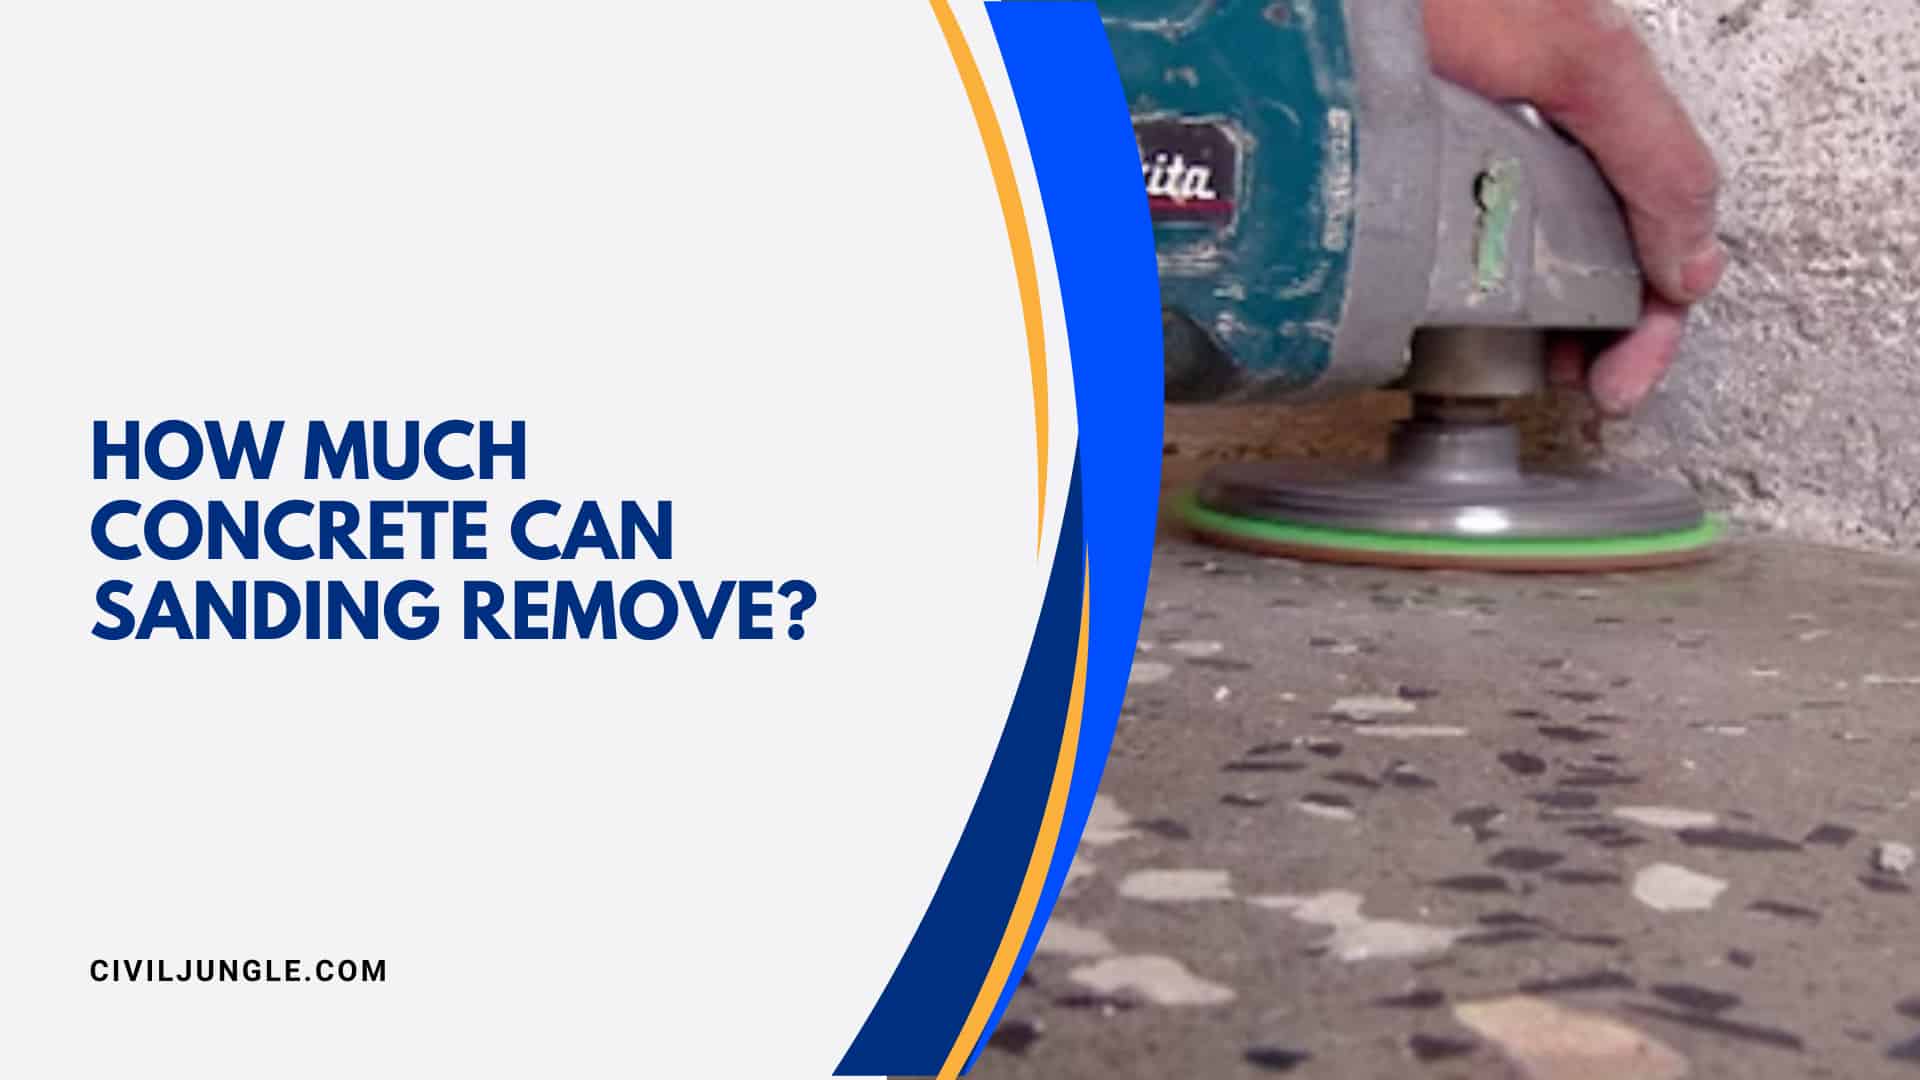 How Much Concrete Can Sanding Remove?